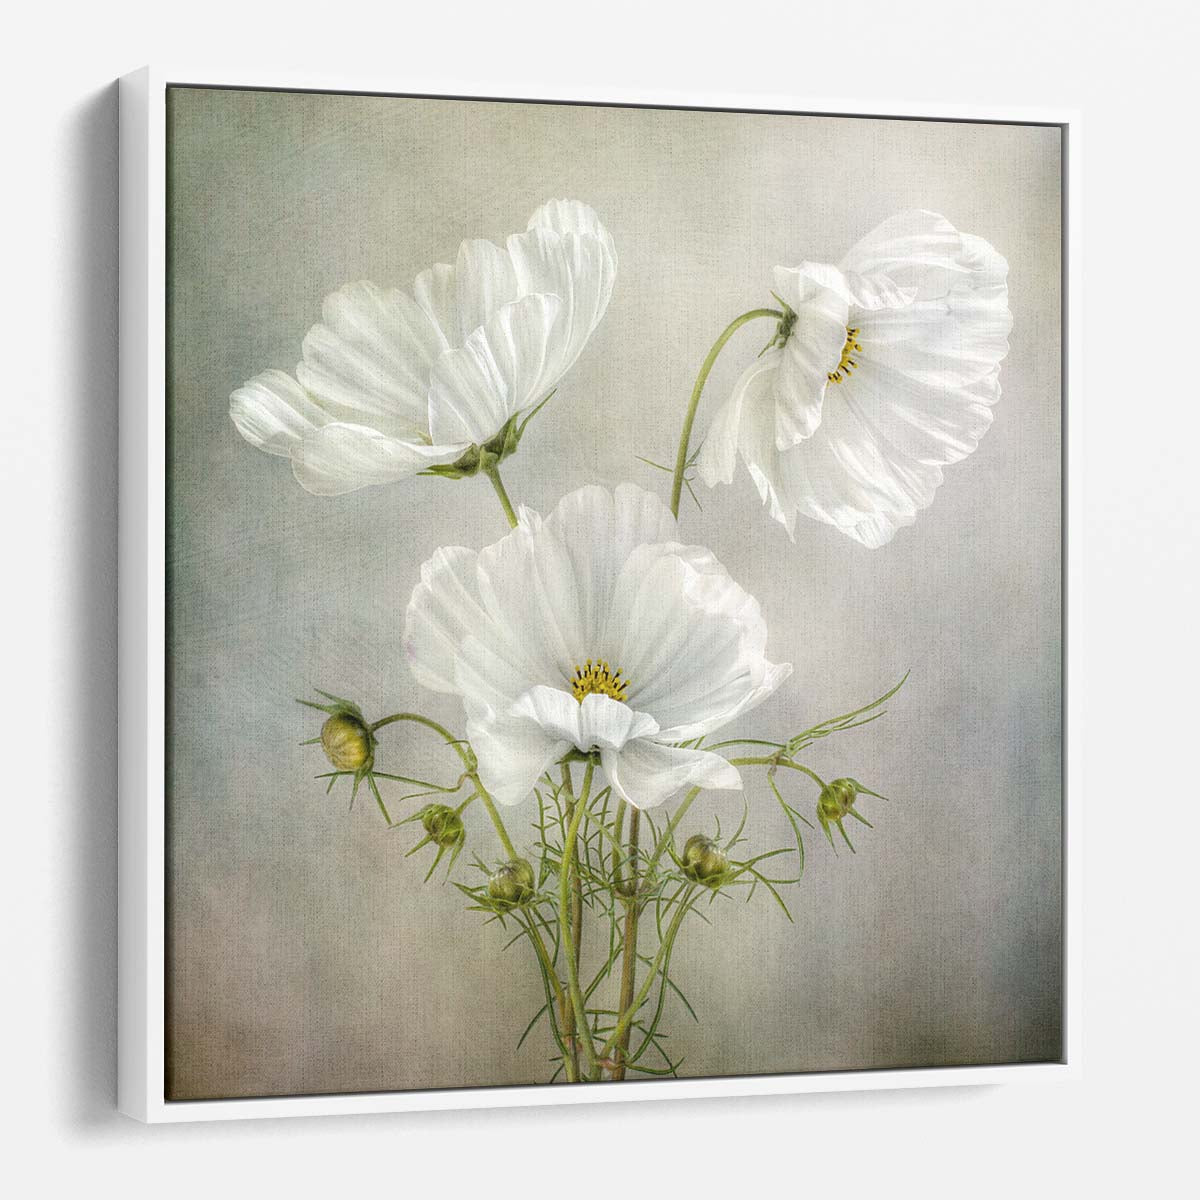 Retro Cosmos Trio Vintage Floral Photography Wall Art by Luxuriance Designs. Made in USA.